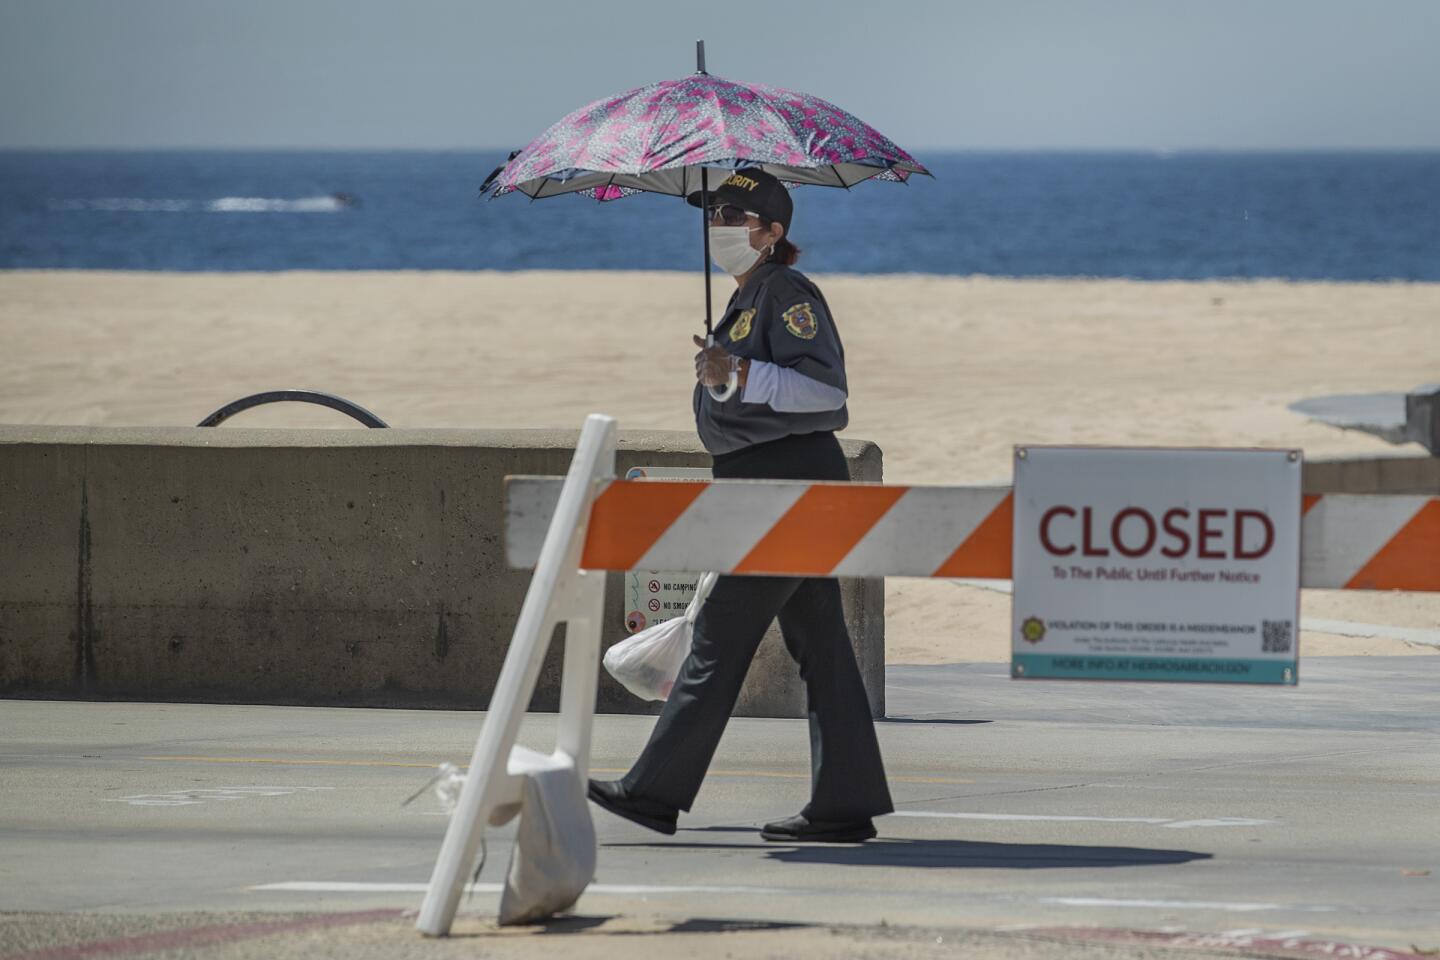 Security guard at Hermosa Beach